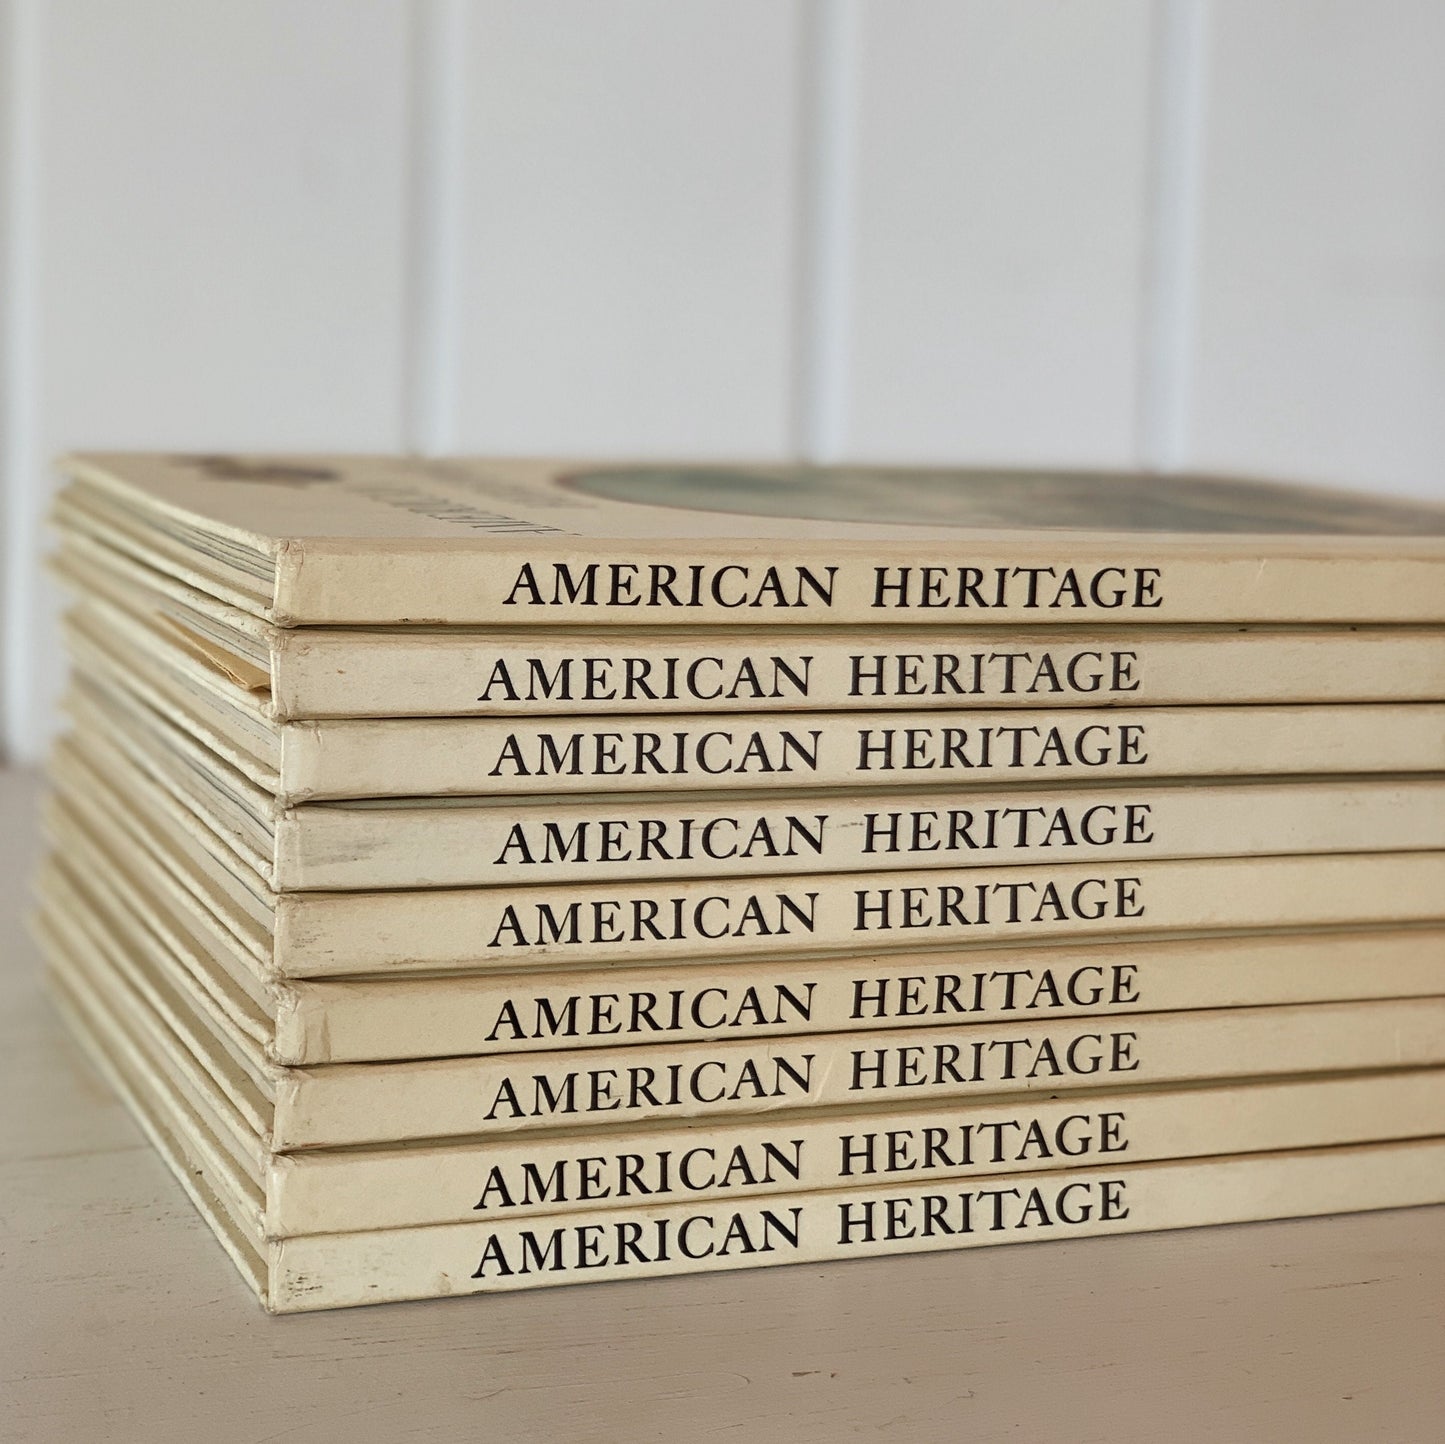 Neutral Vintage Books for Shelf Styling, American Heritage Book Collection, 1959-1960